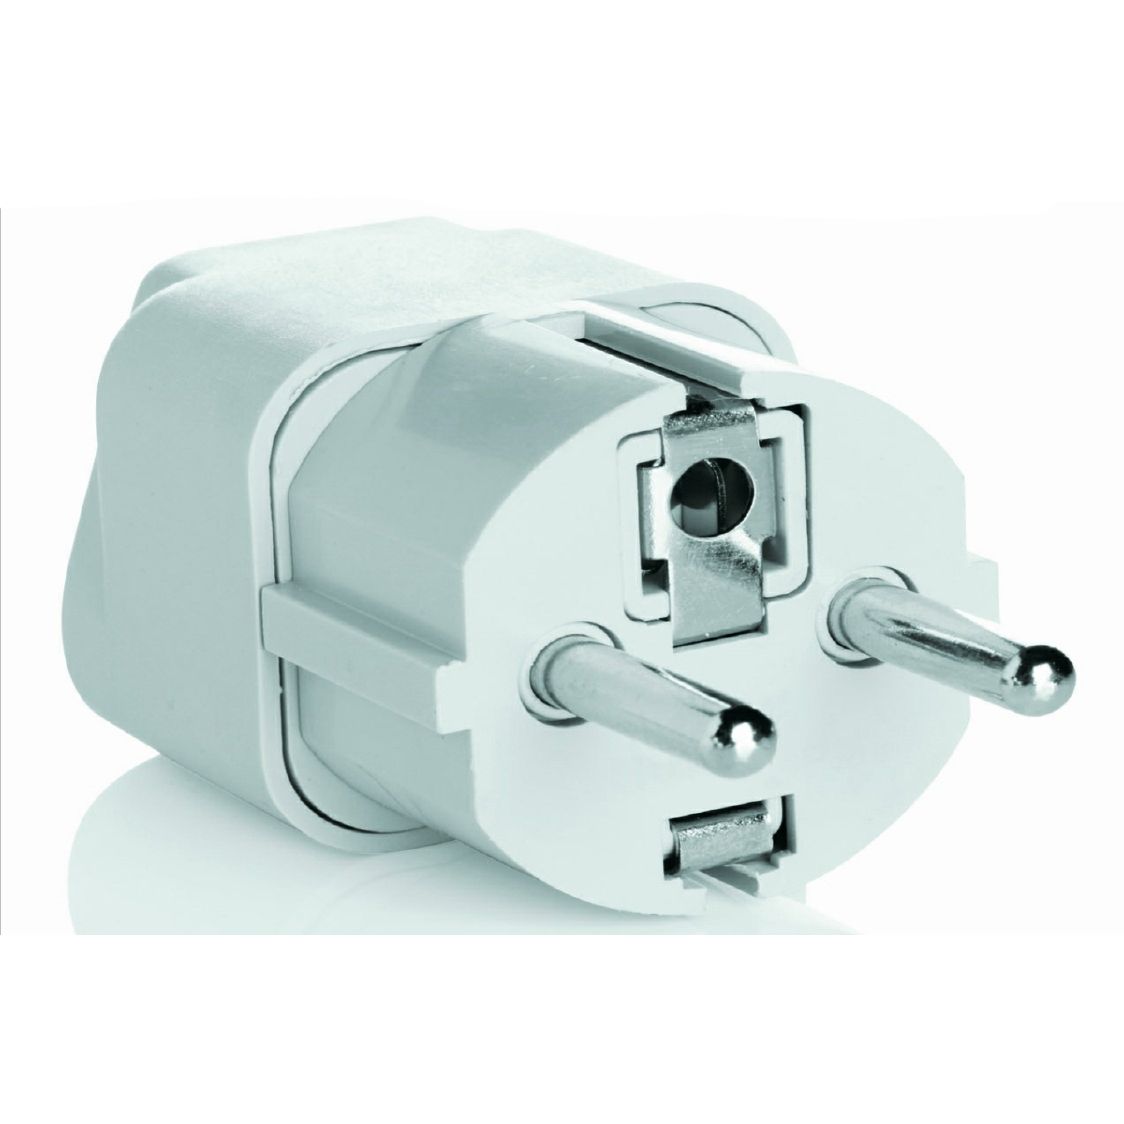 Conair NWG1C Grounded Adapter Plug (Parts of Europe, Middle East, parts of Africa, Asia, the Caribbean)